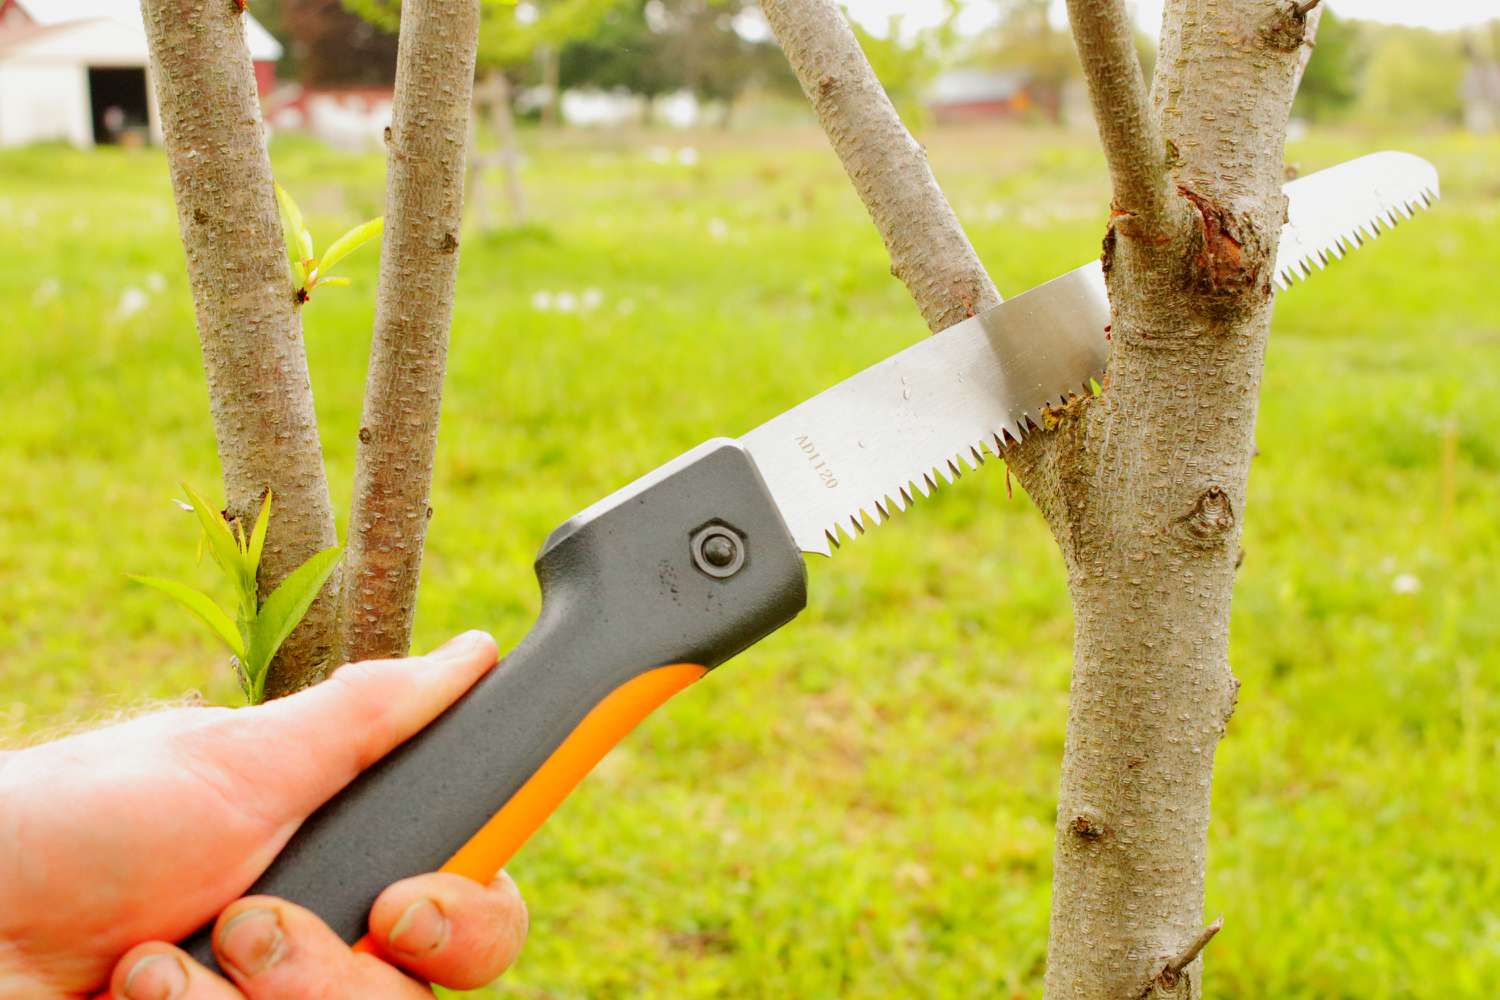 Scaffold branch being cut off peach tree with pruning saw